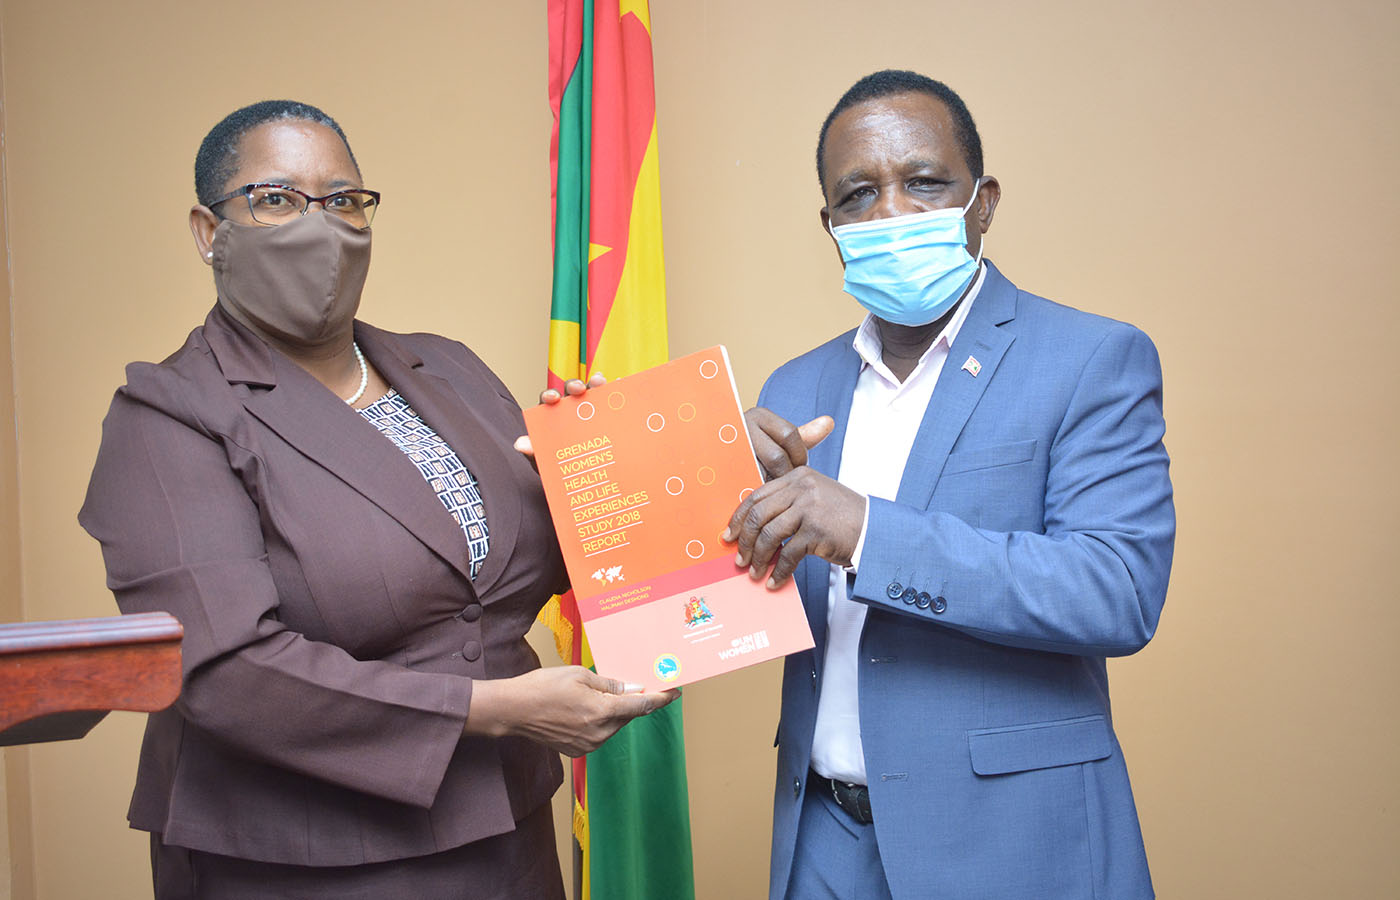 Elaine McQueen in brown suit presents publication to Prime Minister, Dr. Keith Mitchell who is wearing a blue suite. Grenada's flag is int he background